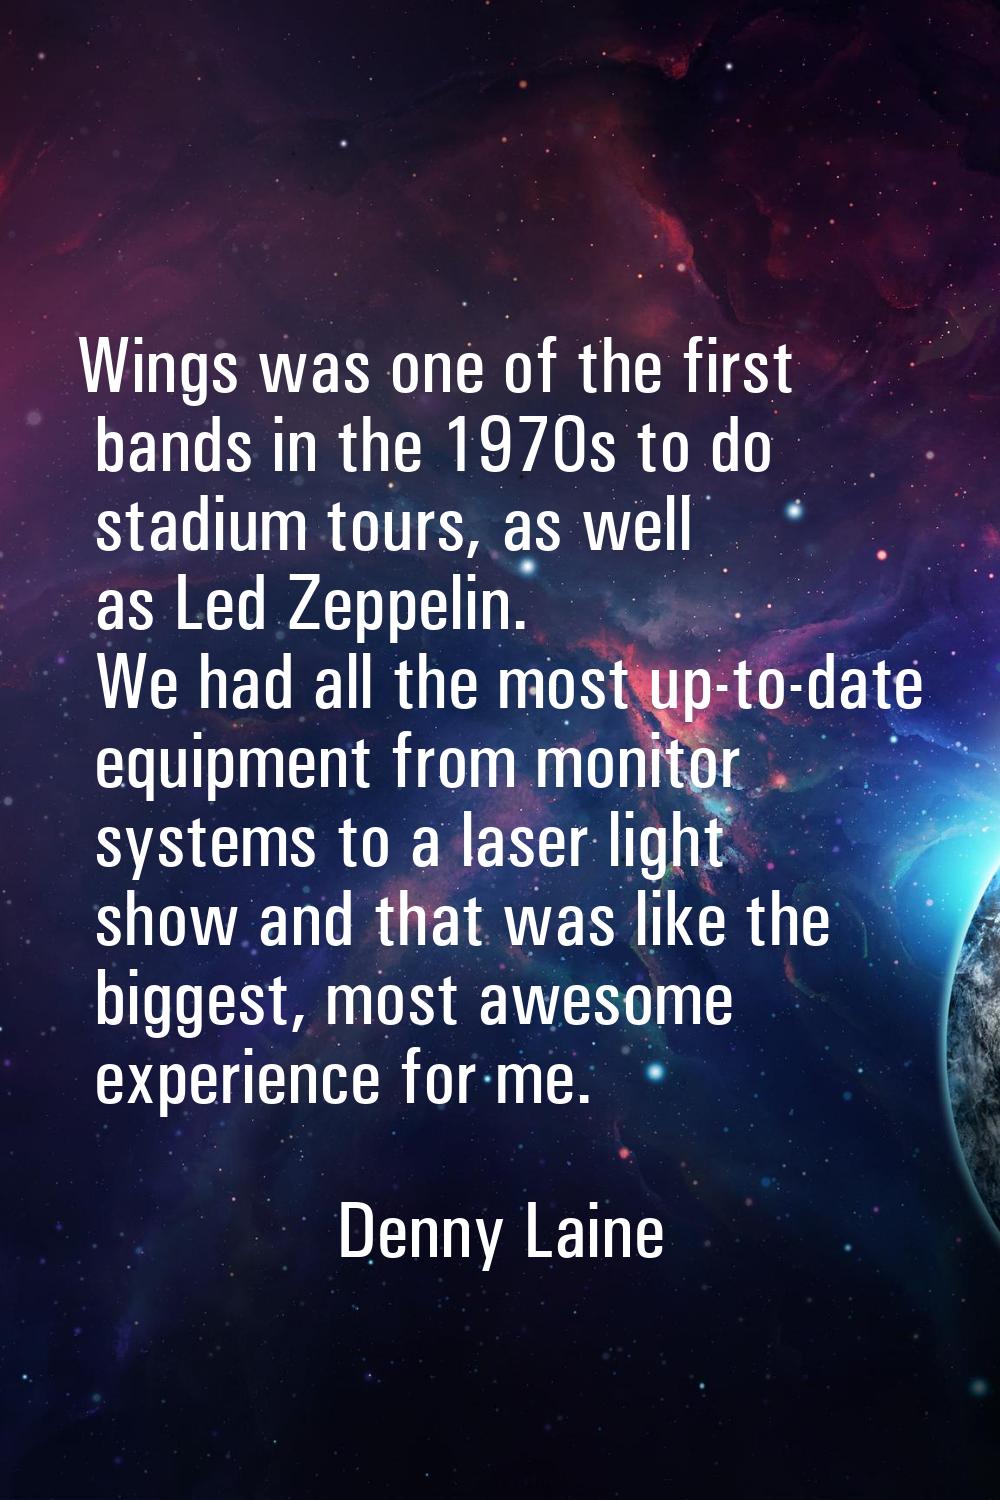 Wings was one of the first bands in the 1970s to do stadium tours, as well as Led Zeppelin. We had 